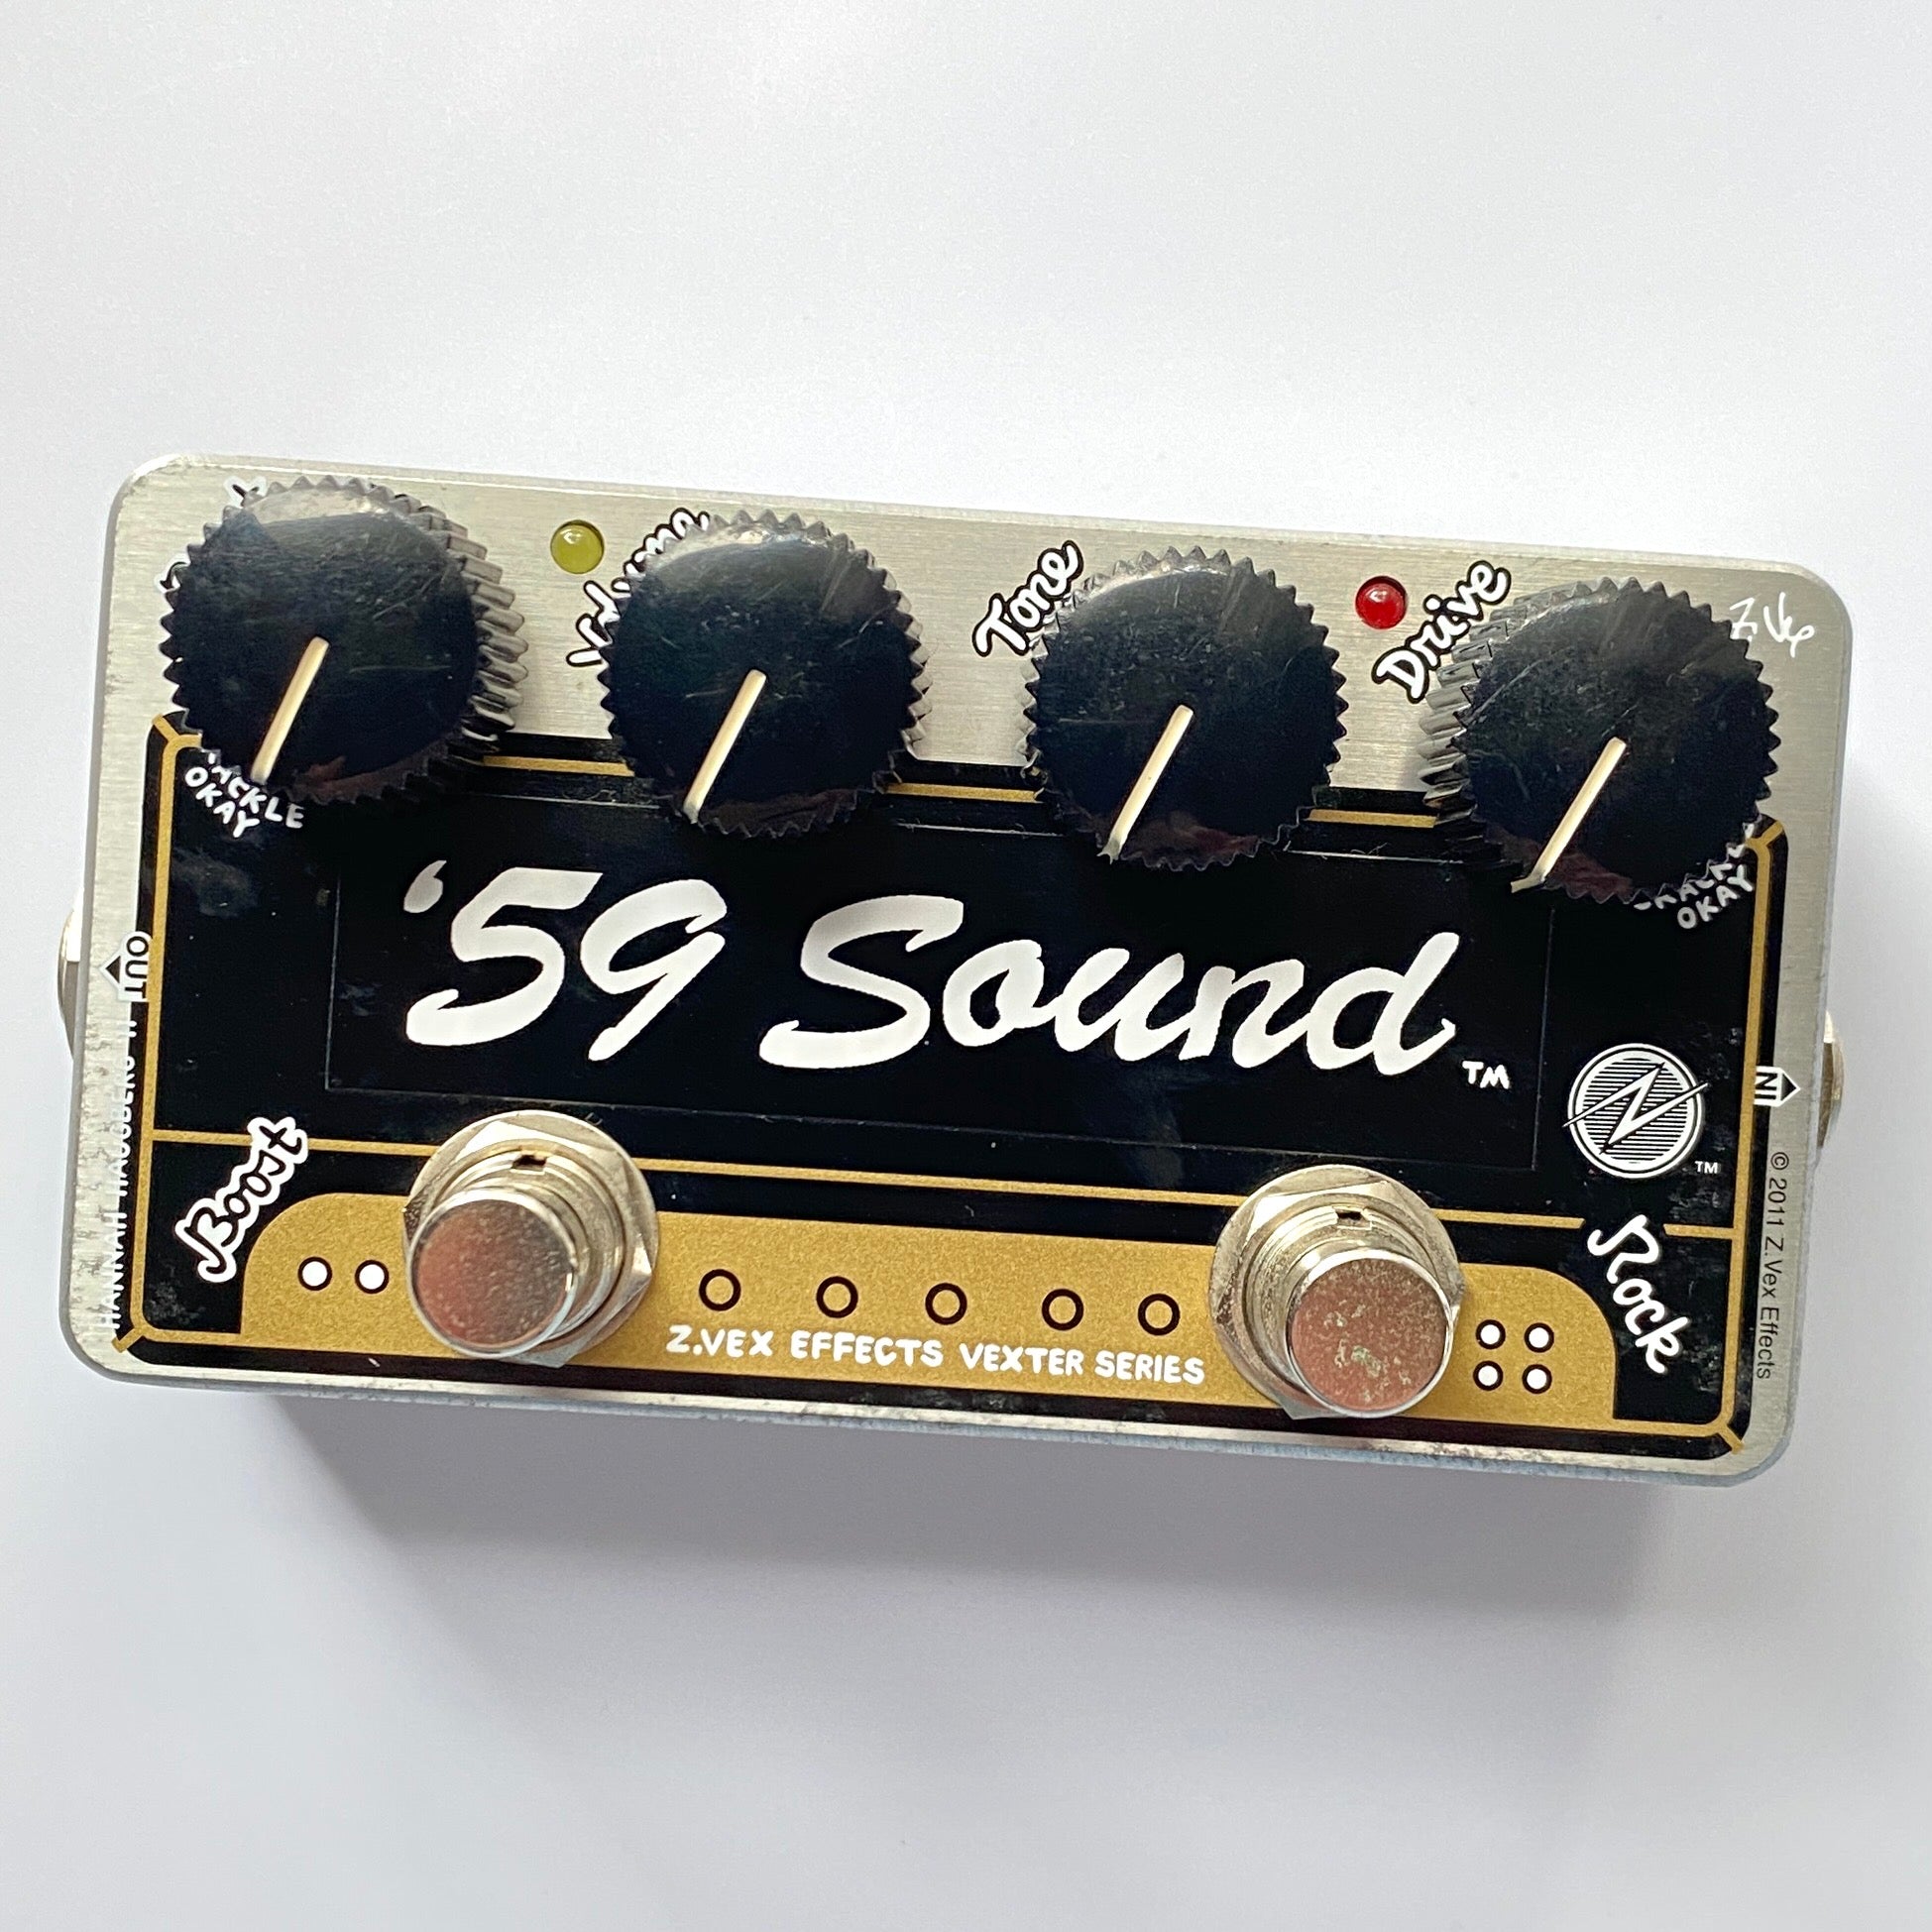 59 Sound Vexter Limited Edition